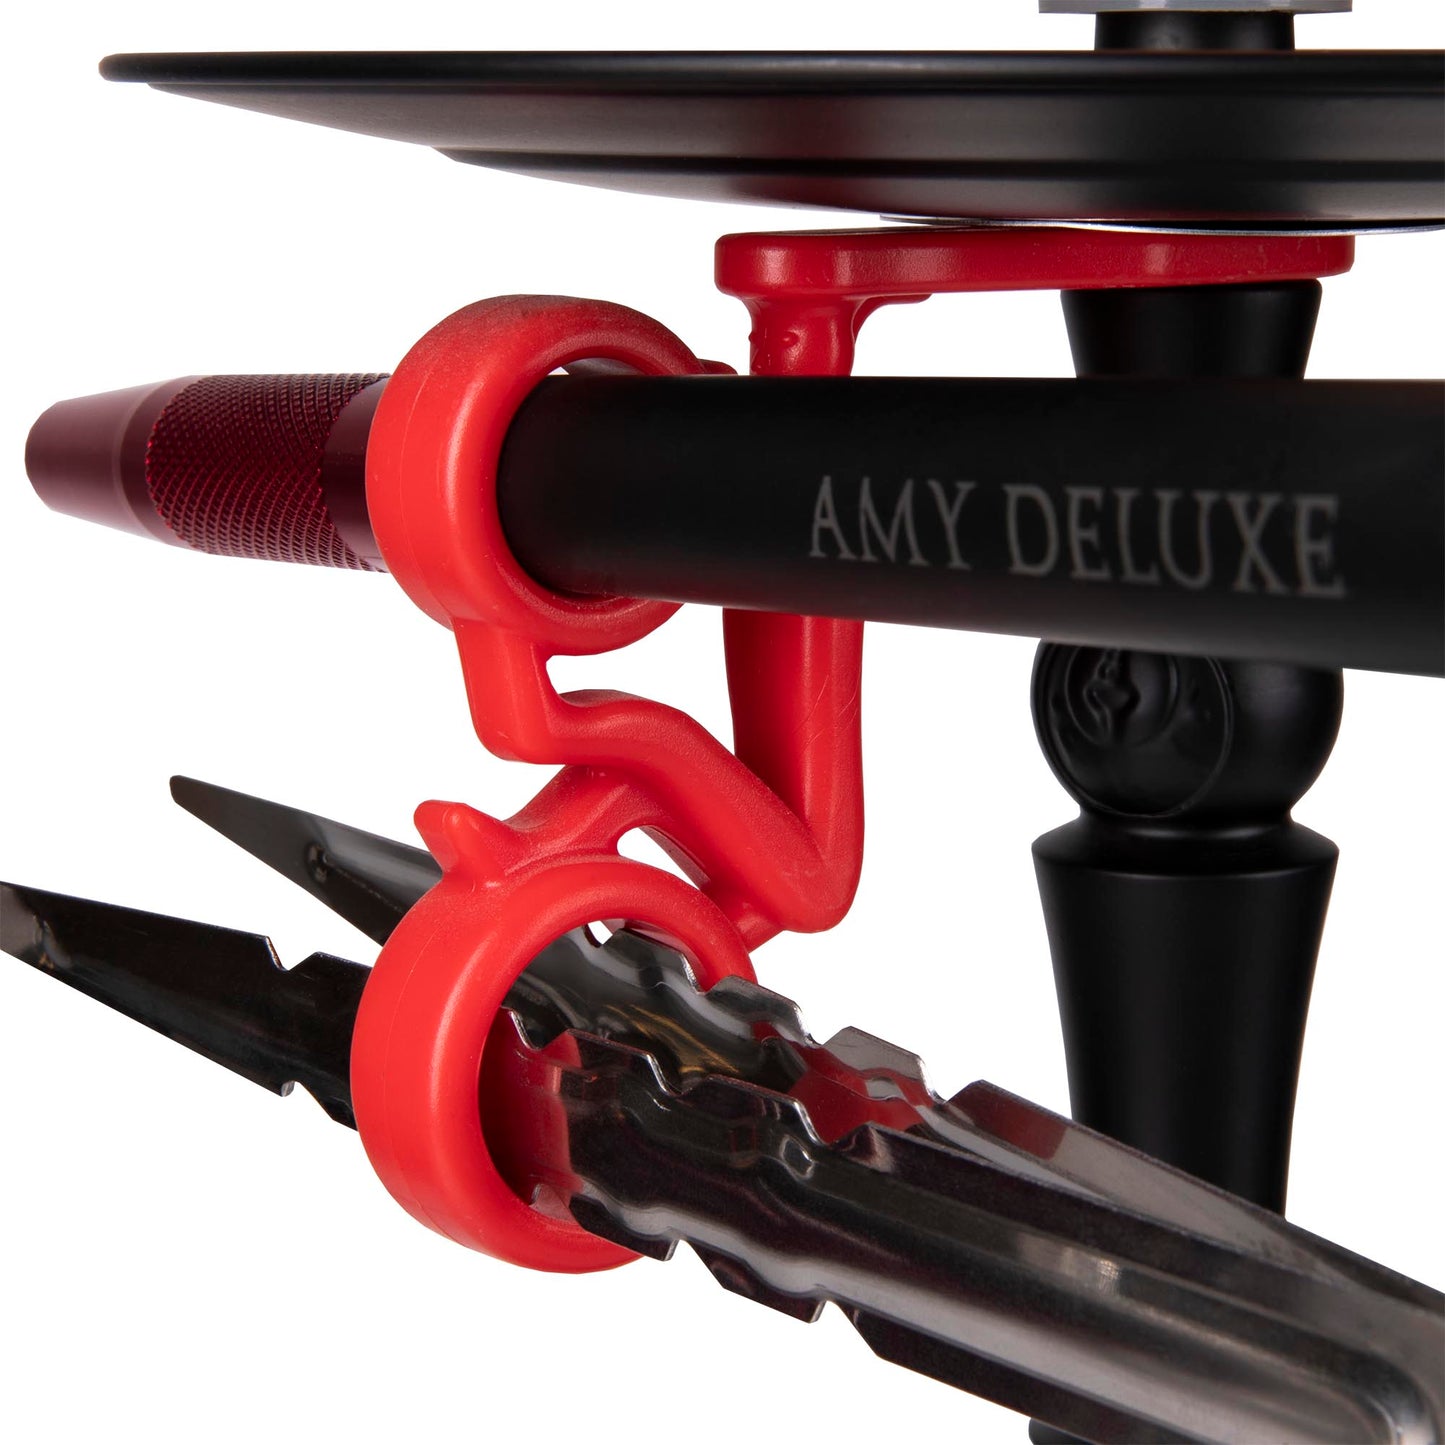 Amy Deluxe Middle Globe